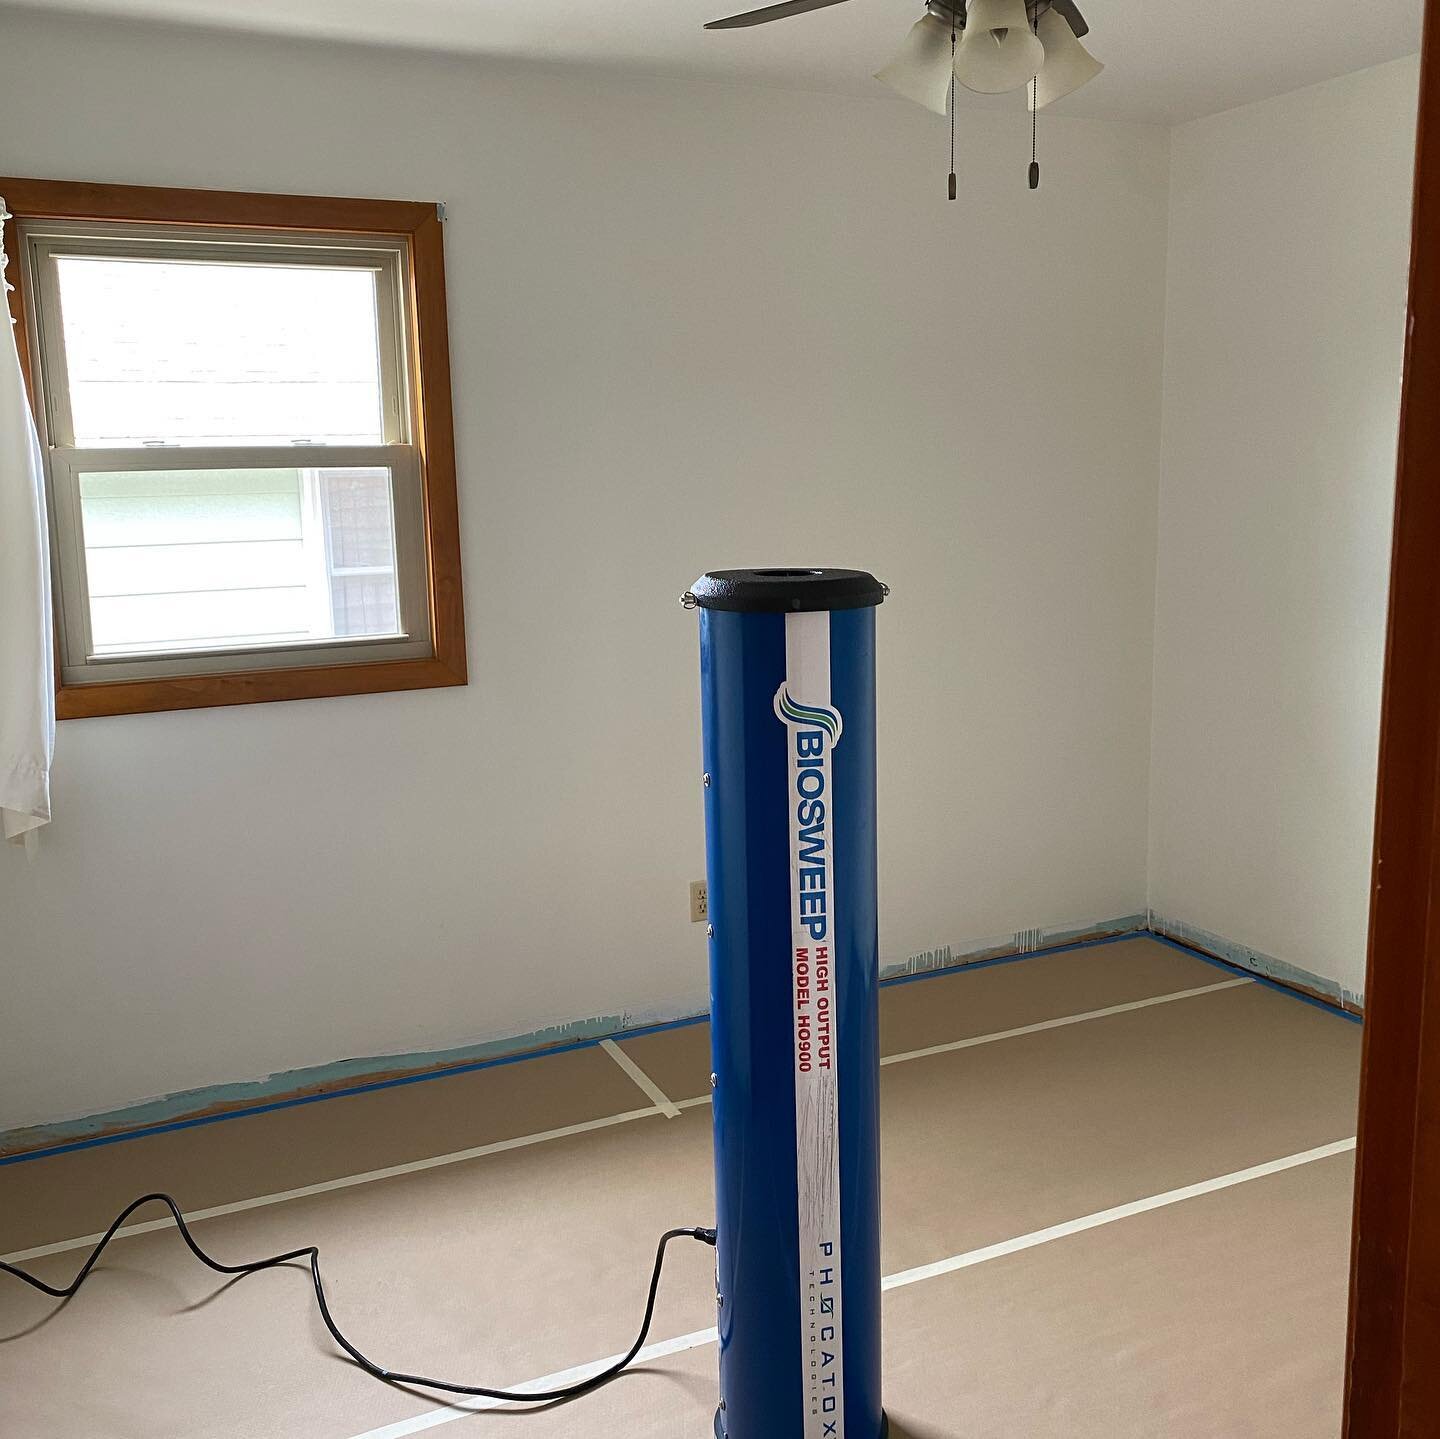 Unfortunately, we didn&rsquo;t warranty this work because the previous owners of the home tried to cover up the odor from their cigarette smoke with paint. But we treated it like normal and it came out great! The new homeowner was super happy with th